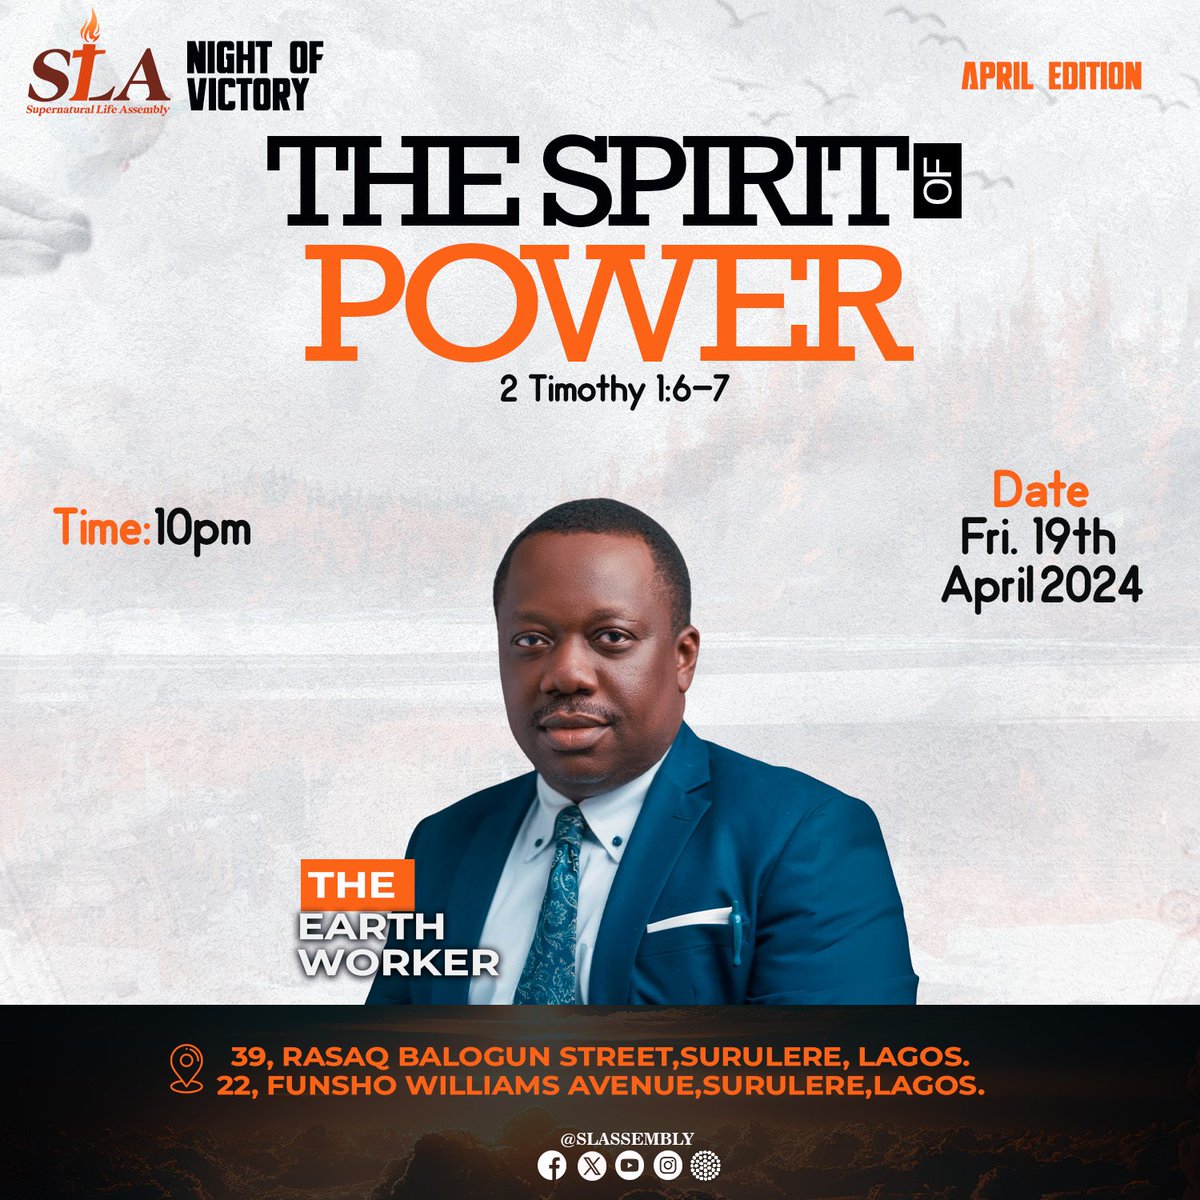 We are excited and ready as we see The Day approaching. Night of Victory is tomorrow 🎉🥳!! #spiritofpower #nightofvictory